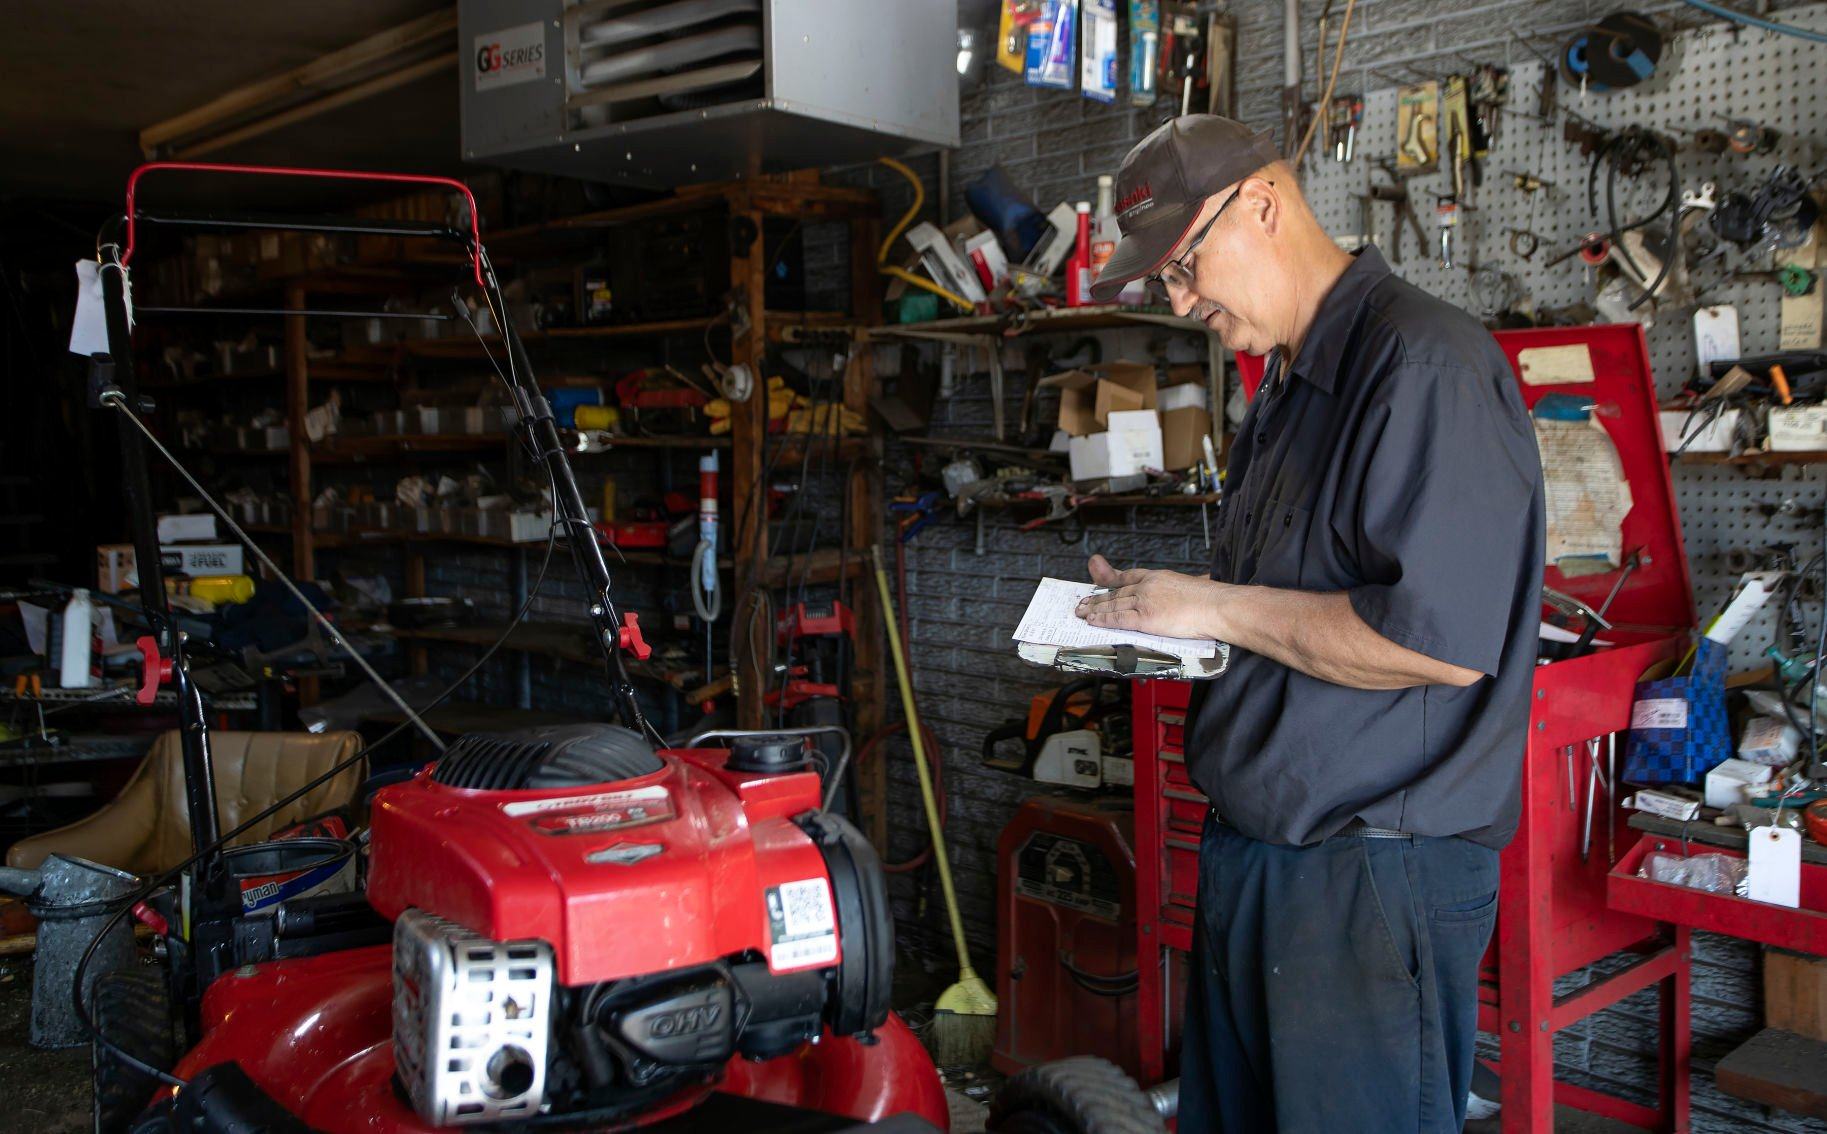 Scott Siefert performs maintenance on a mower in the shop at McGovern Hardware in Dubuque on Thursday, May 12, 2022.    PHOTO CREDIT: Stephen Gassman